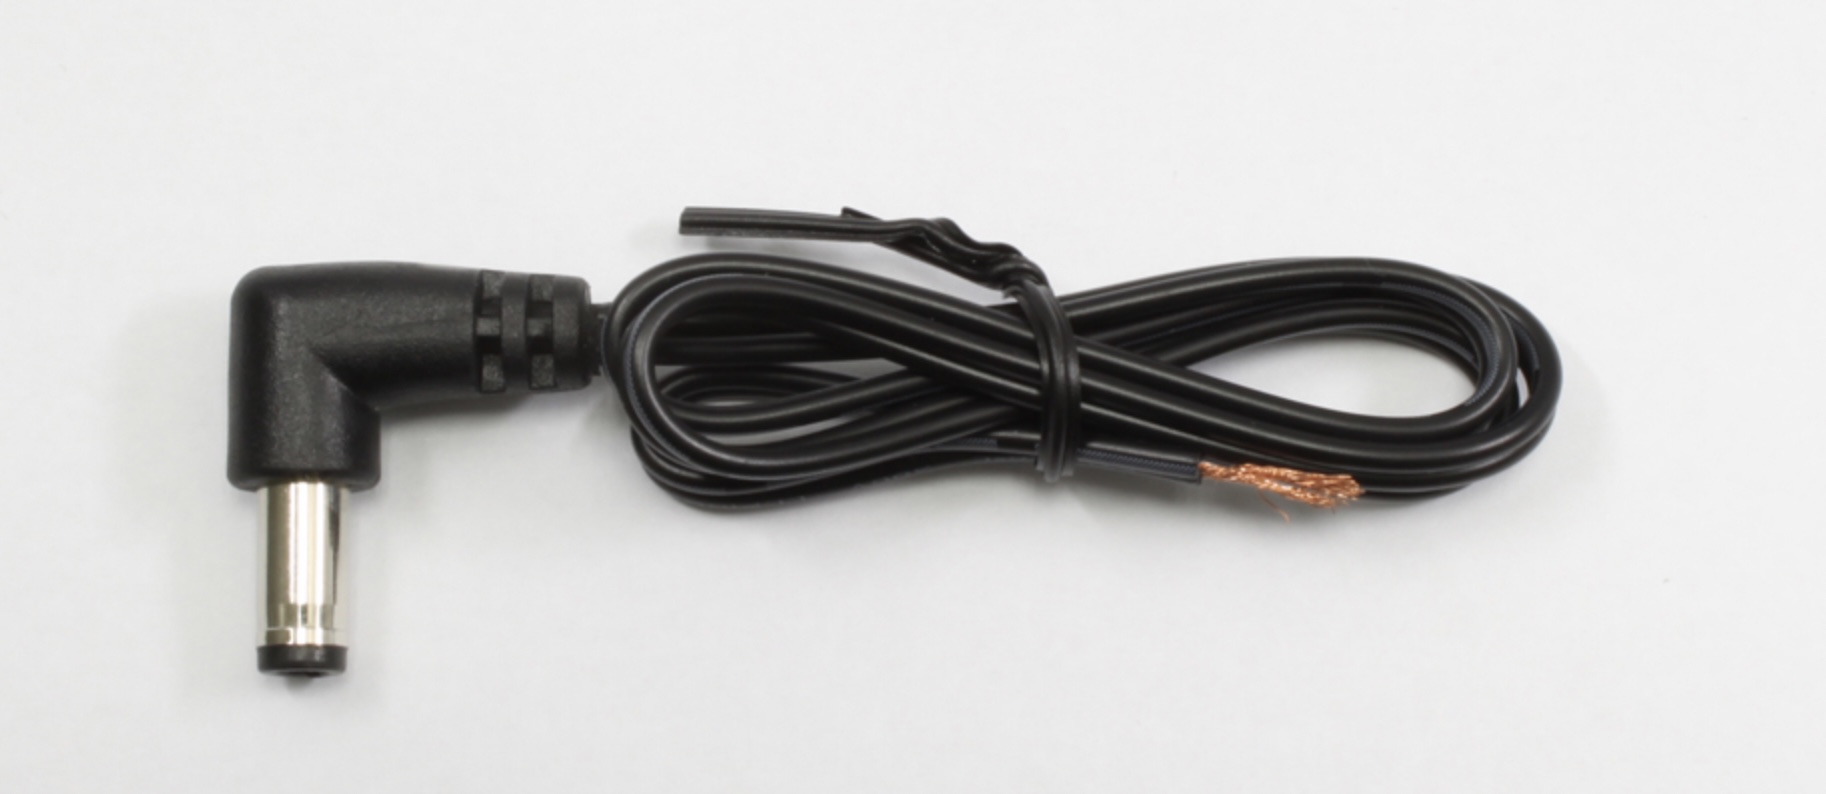 Z Scale - Rokuhan - A010 - Power Supplies, AC Cable - Power Supplies